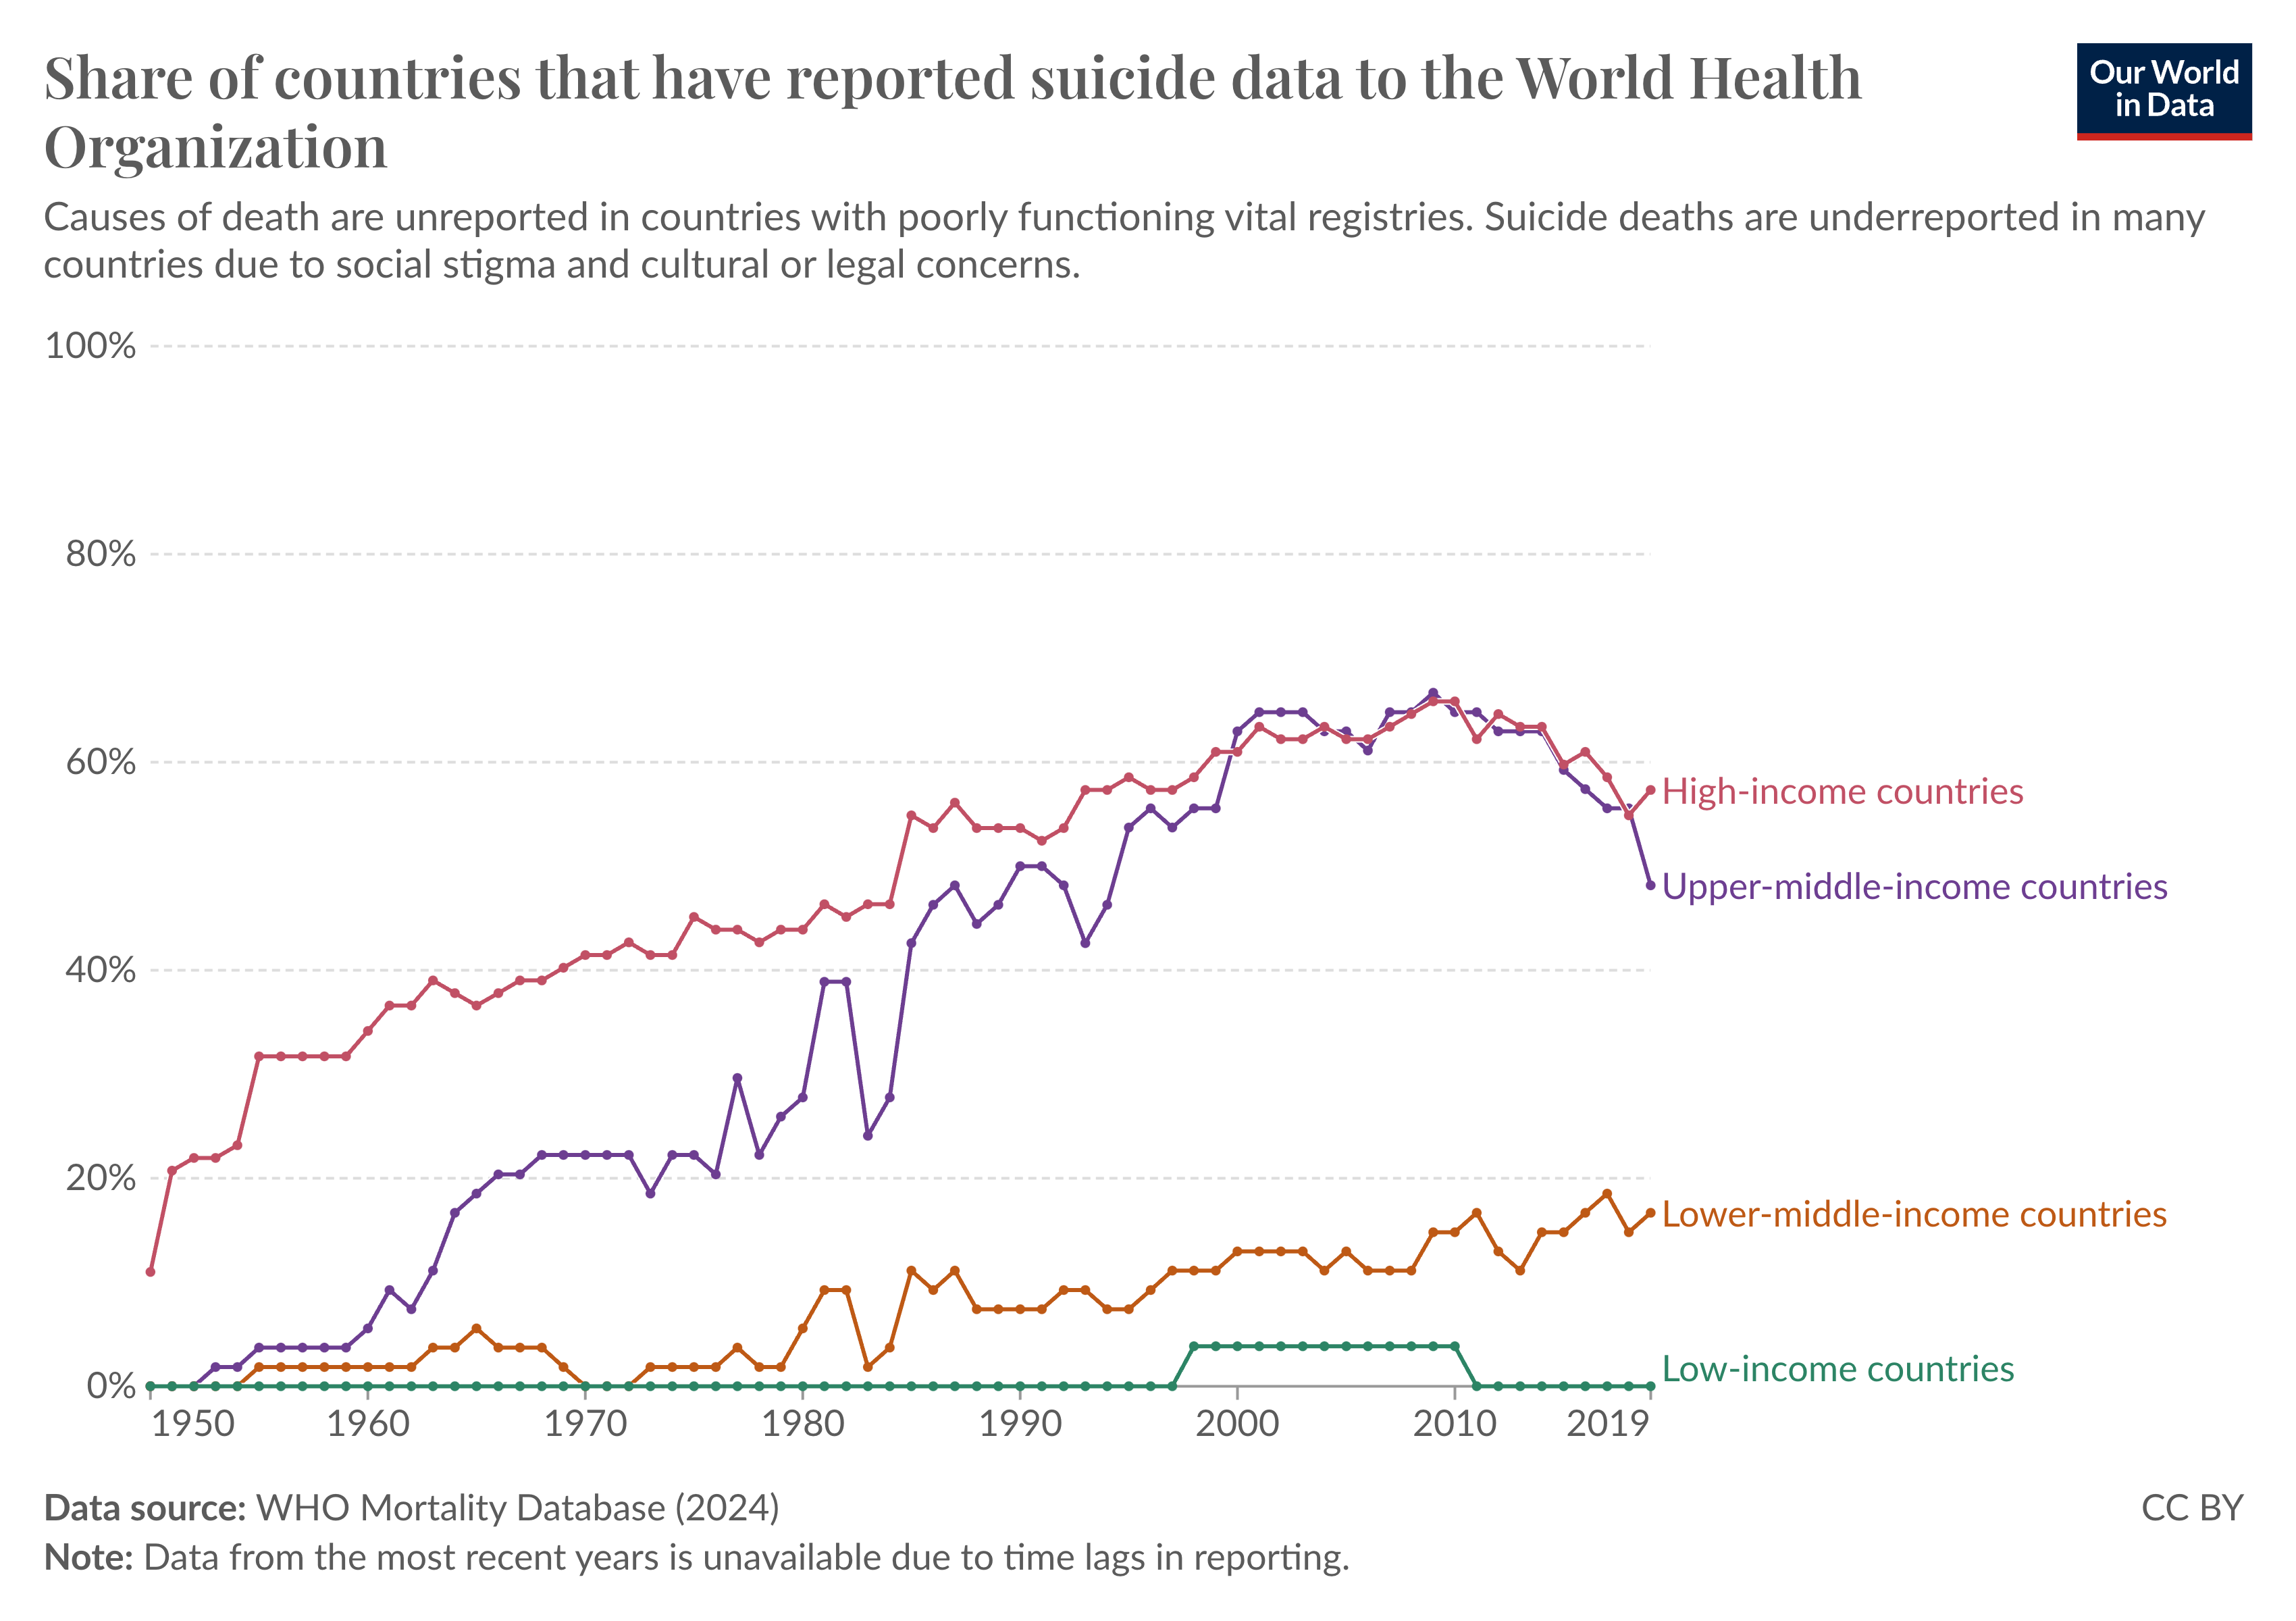 Line chart showing the fraction of countries with available data on deaths from suicide. The fraction is shown for countries of different income groups. Around 60% of high-income countries share data on annual suicide rates with the World Health Organization, but less than 20% of lower-middle-income countries do, and no low-income countries have done so since 2011.